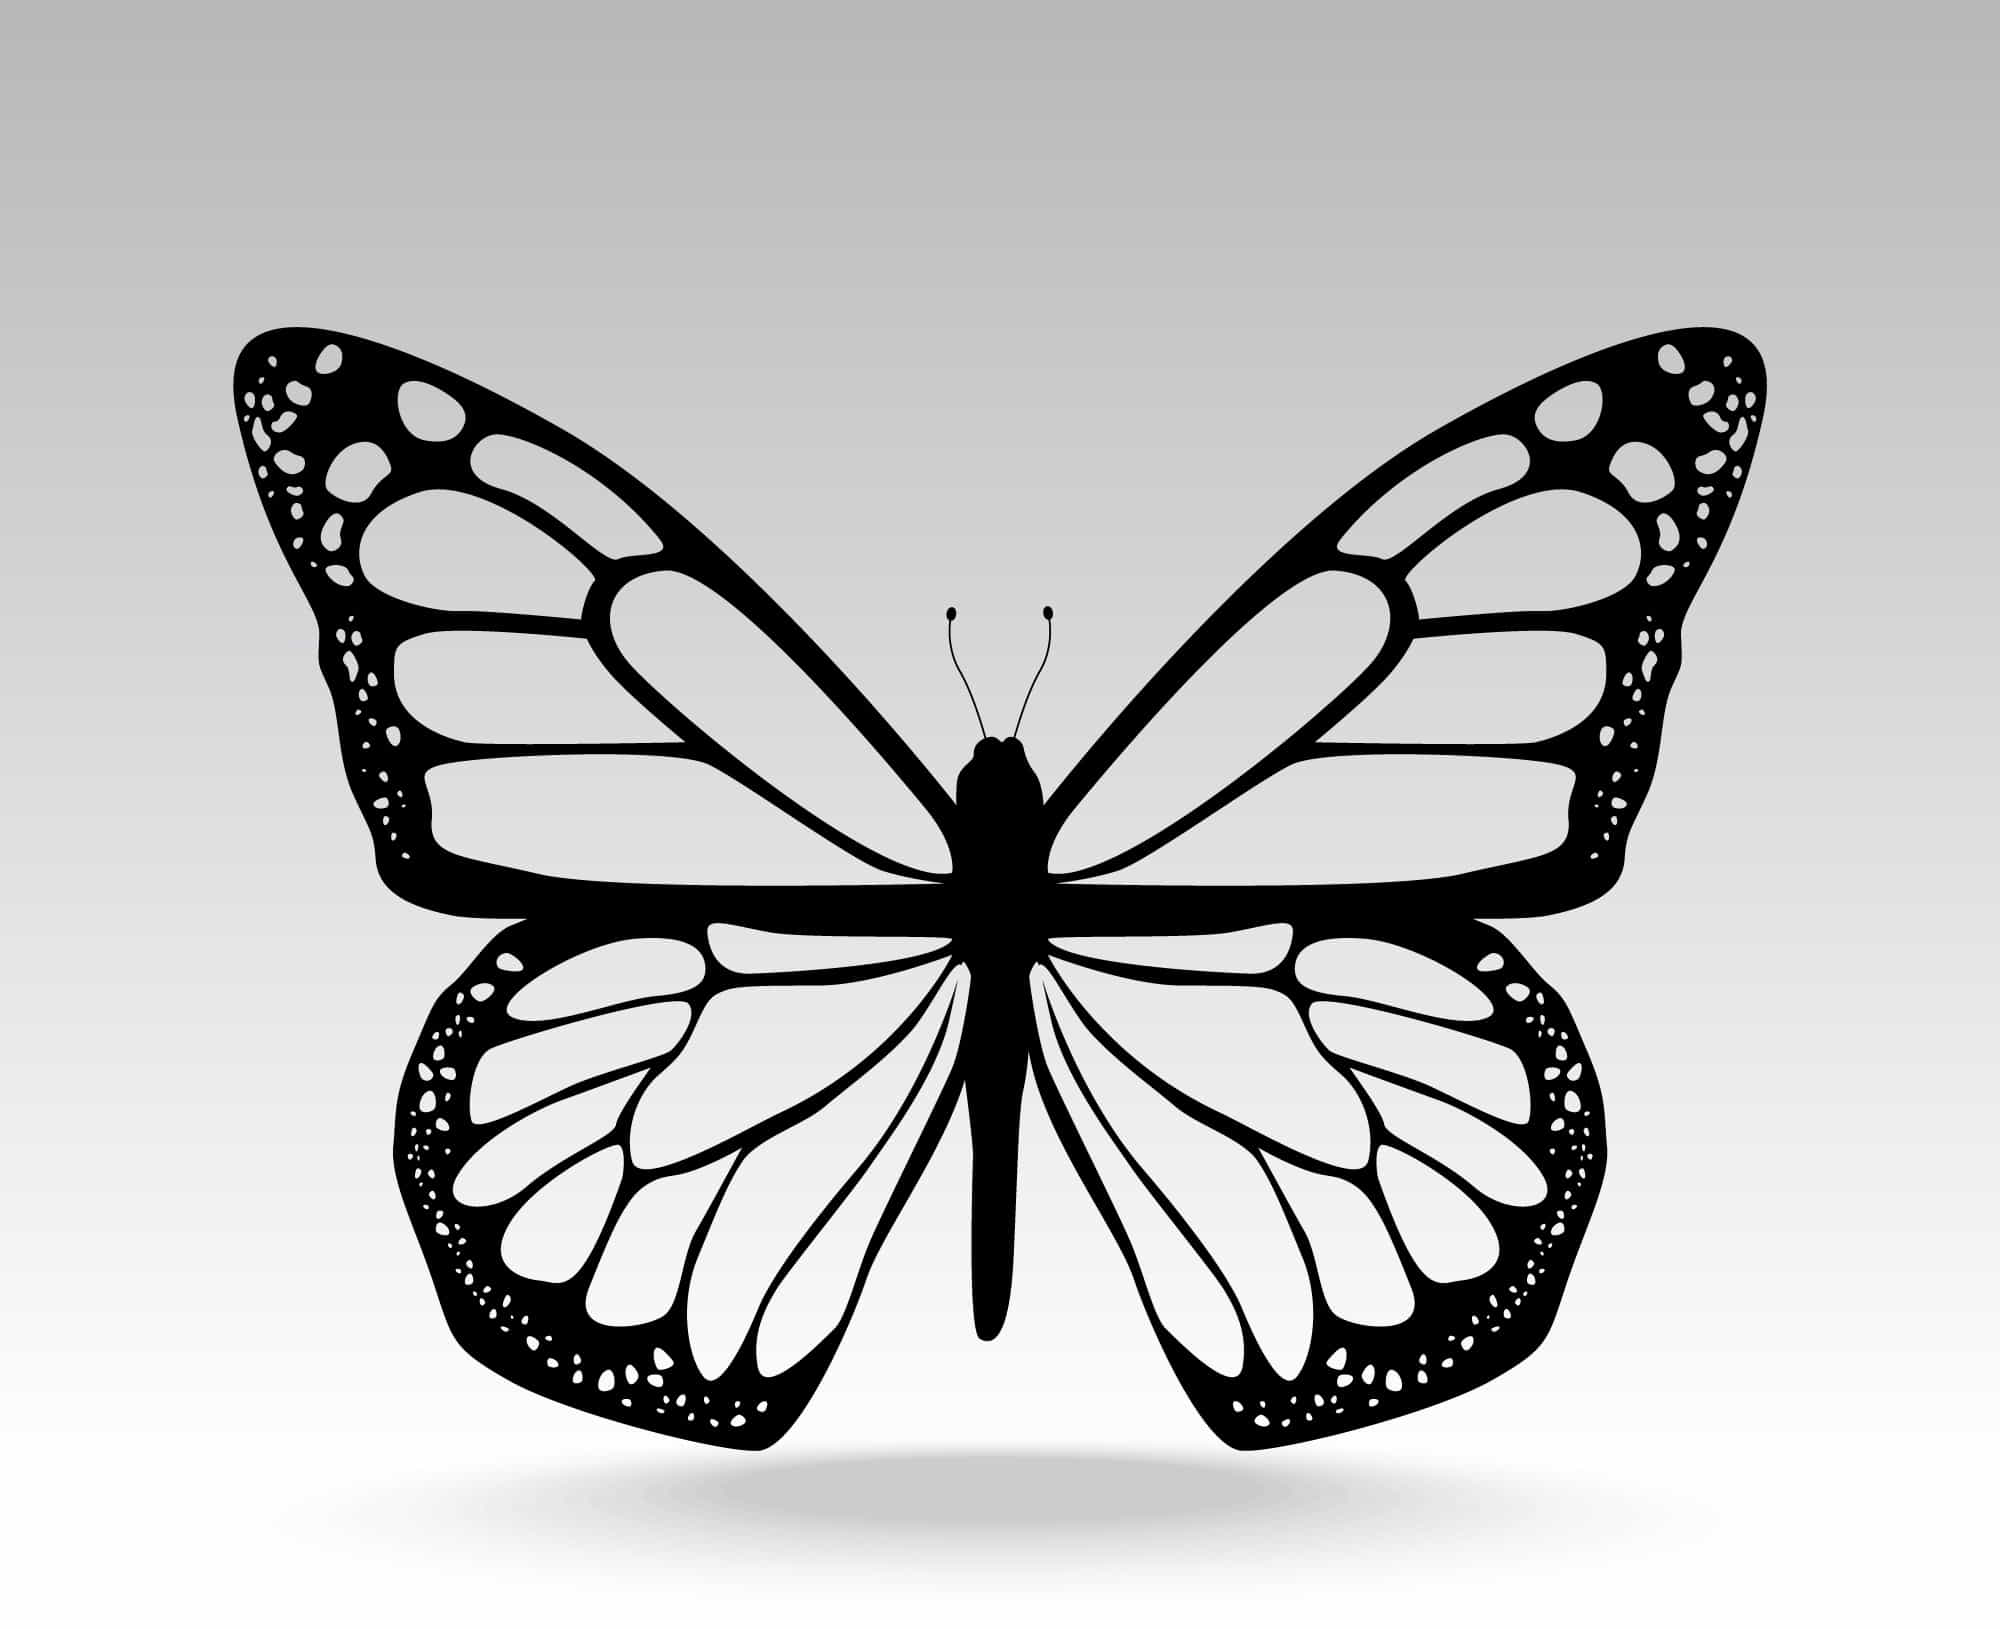 Classic Isolated Butterfly Illustration Free Vector